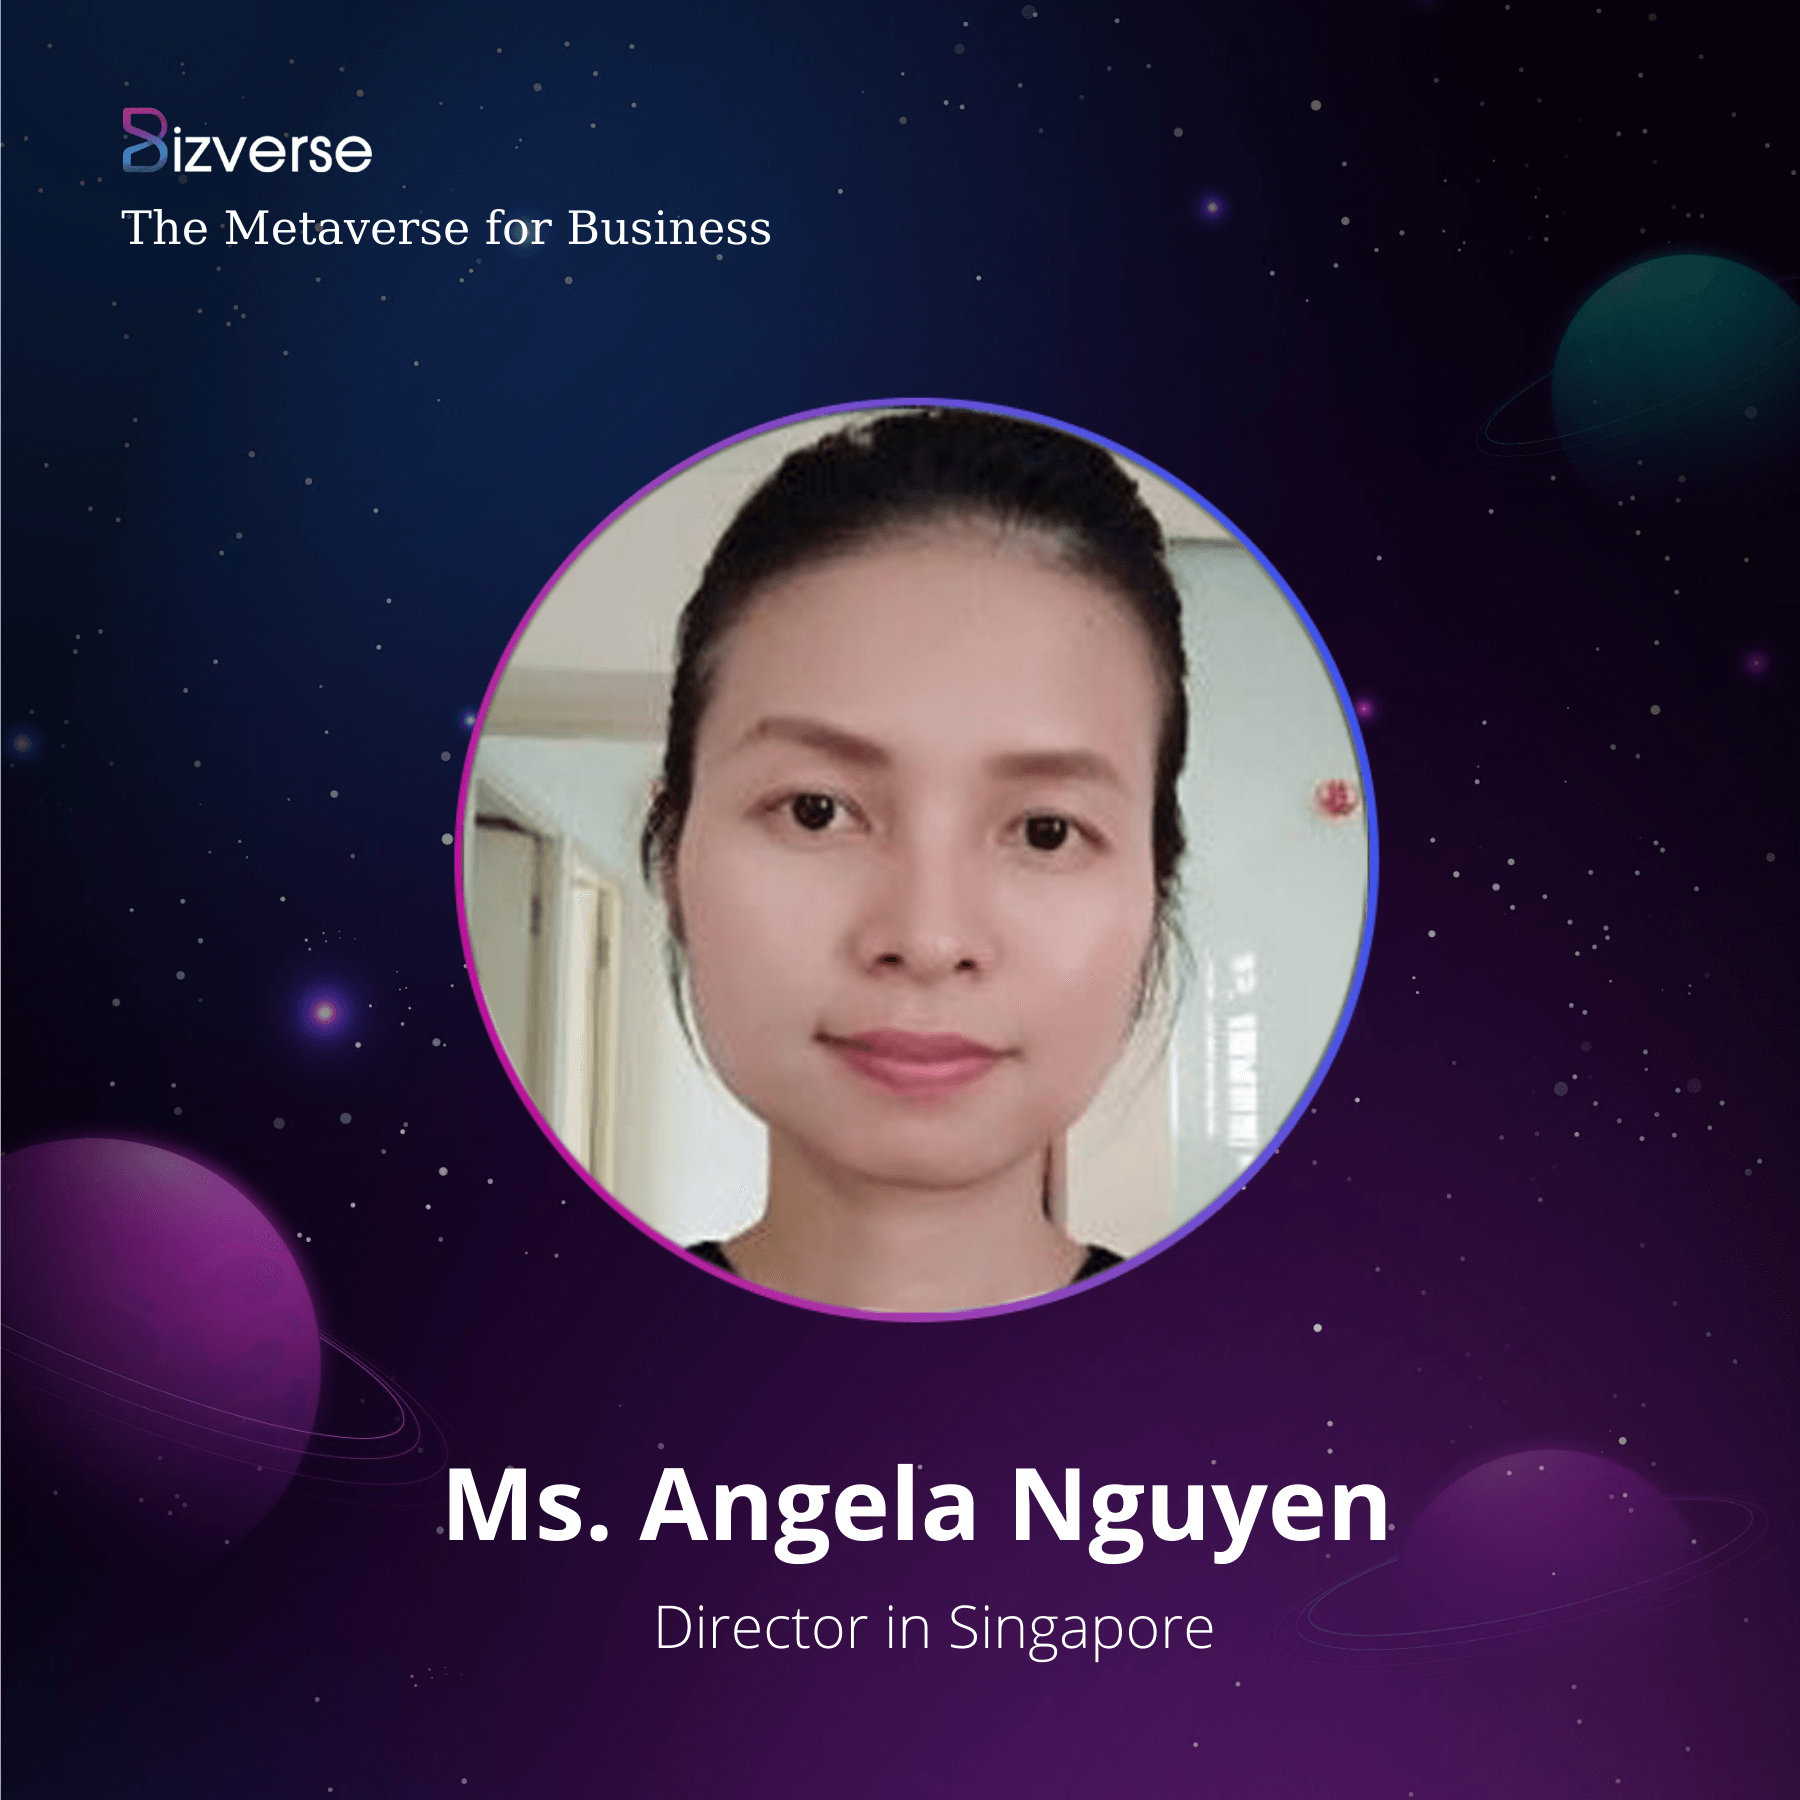 Ms. Angela Nguyen officially joined Bizverse Team as Director in Singapore.